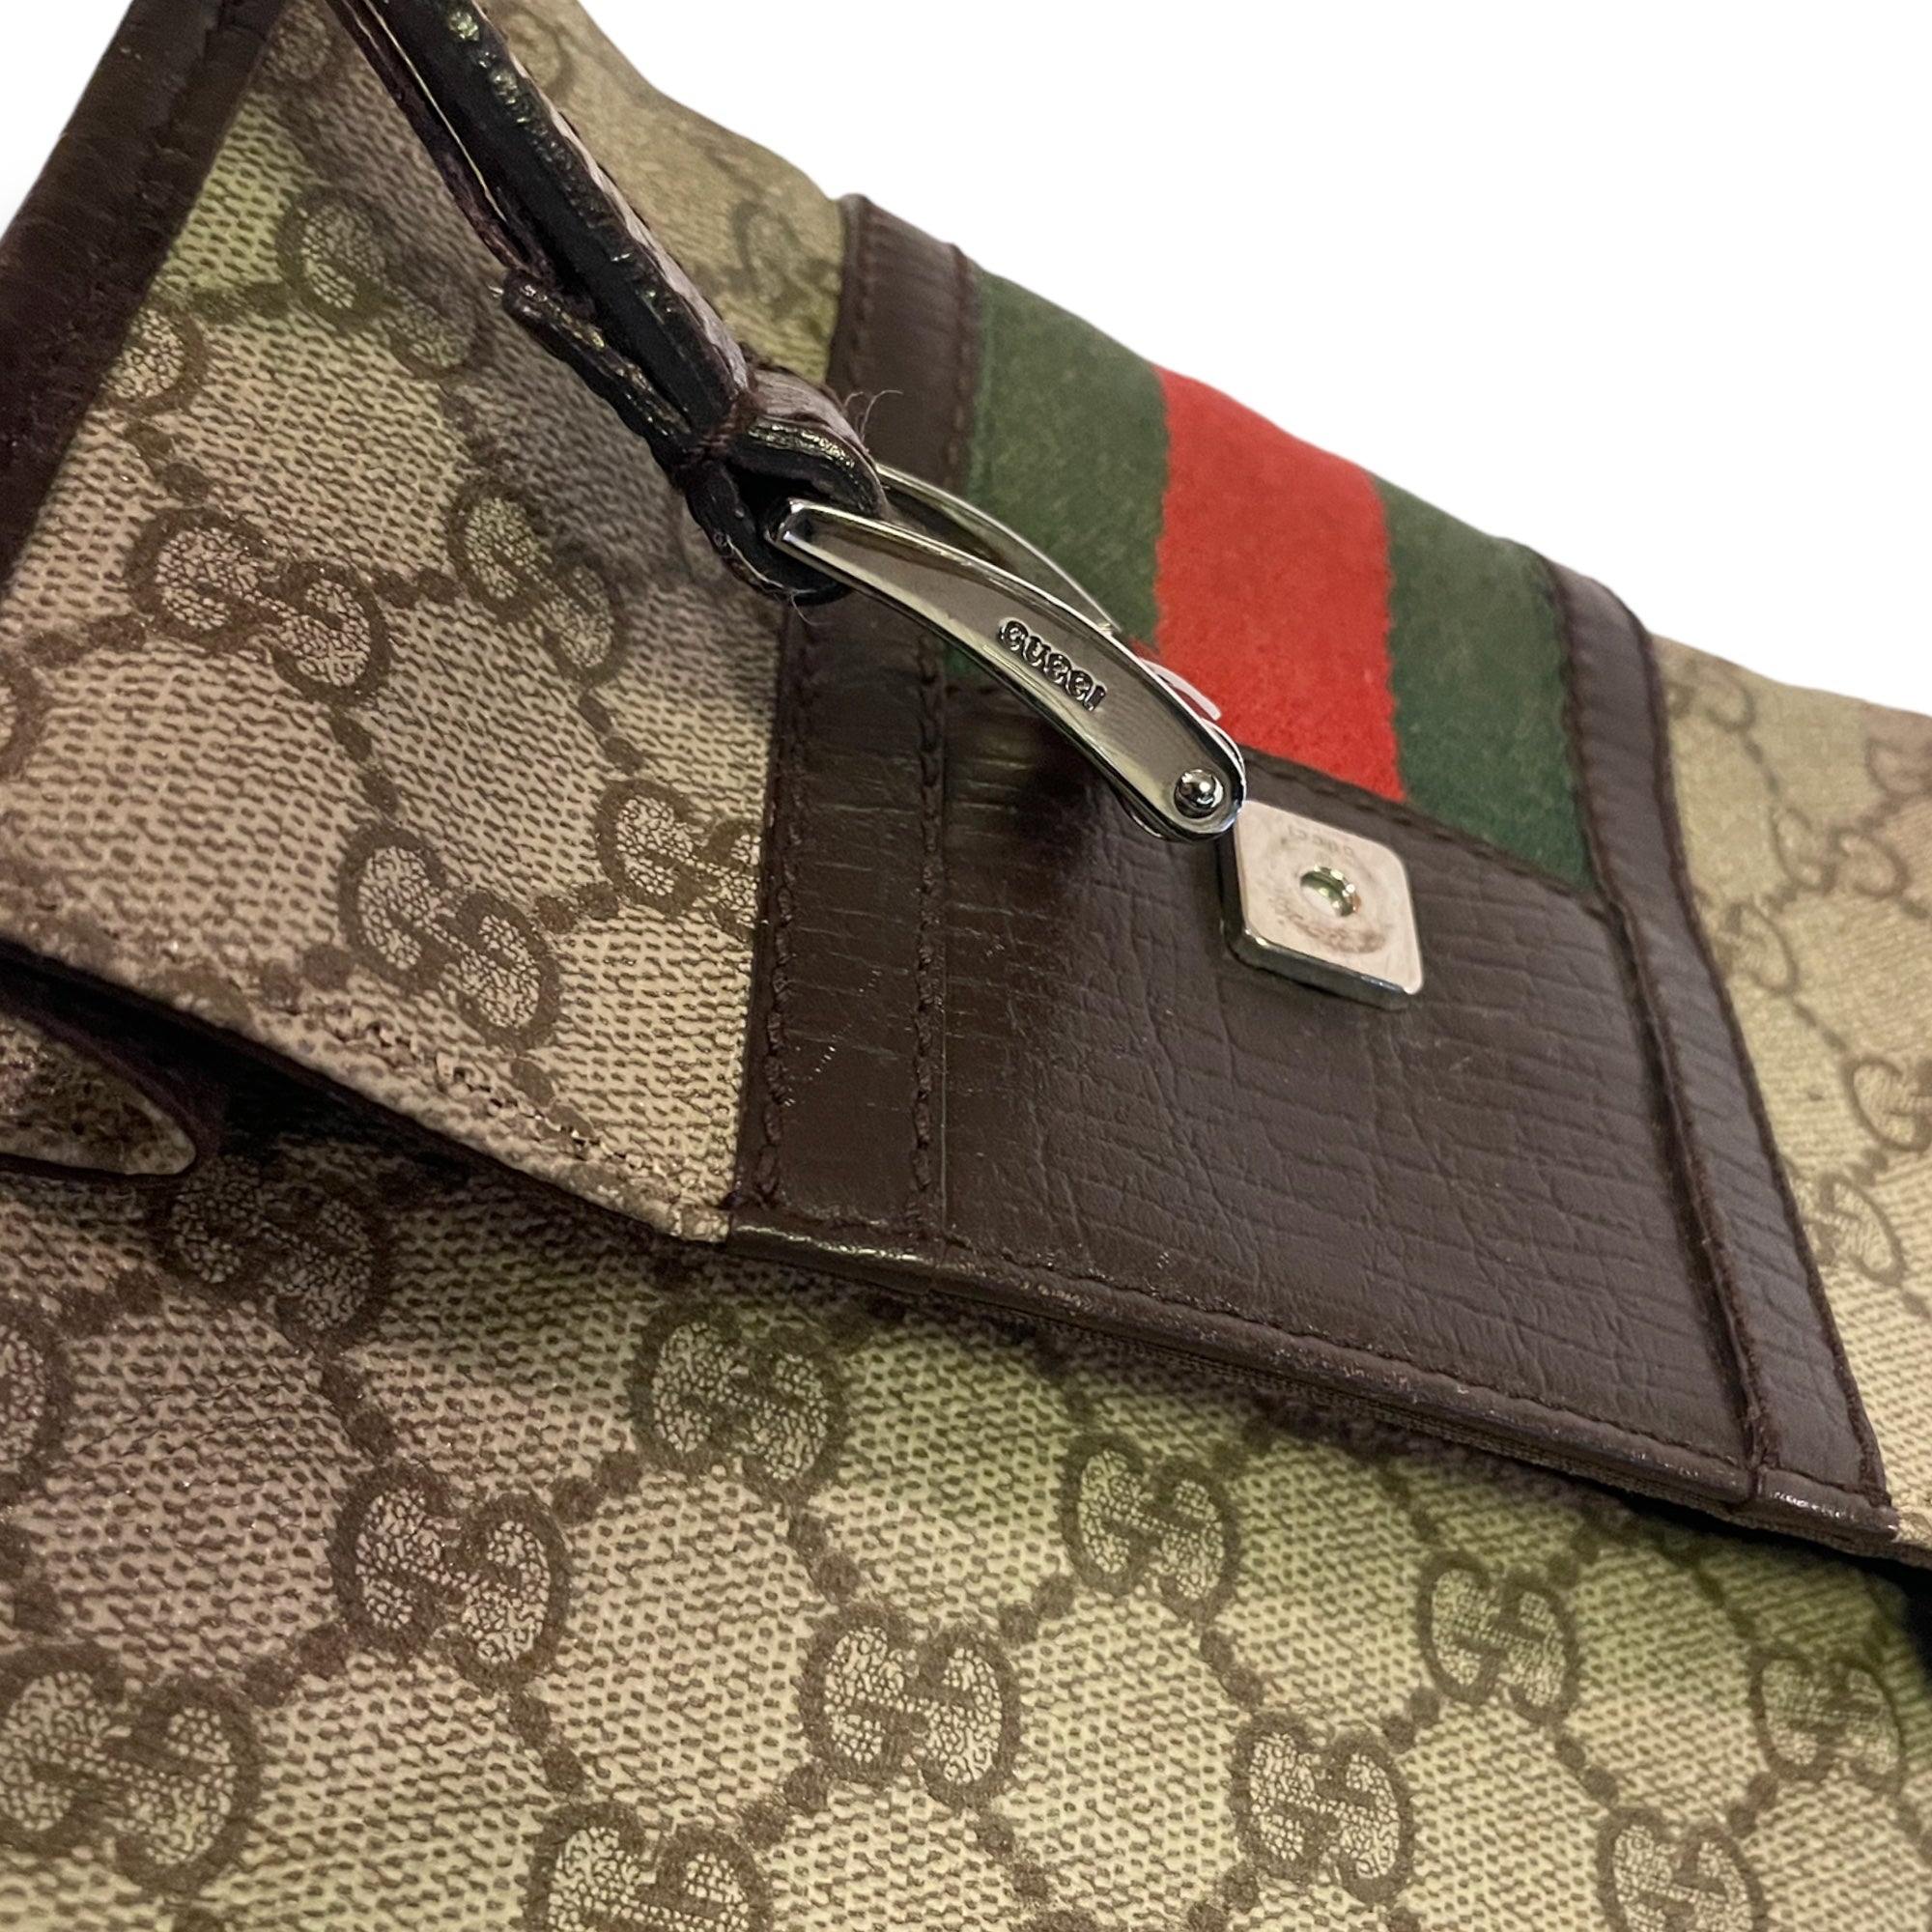 GUCCI Monogram with Web Front and Brown Leather Trim Sling/Bum Bag